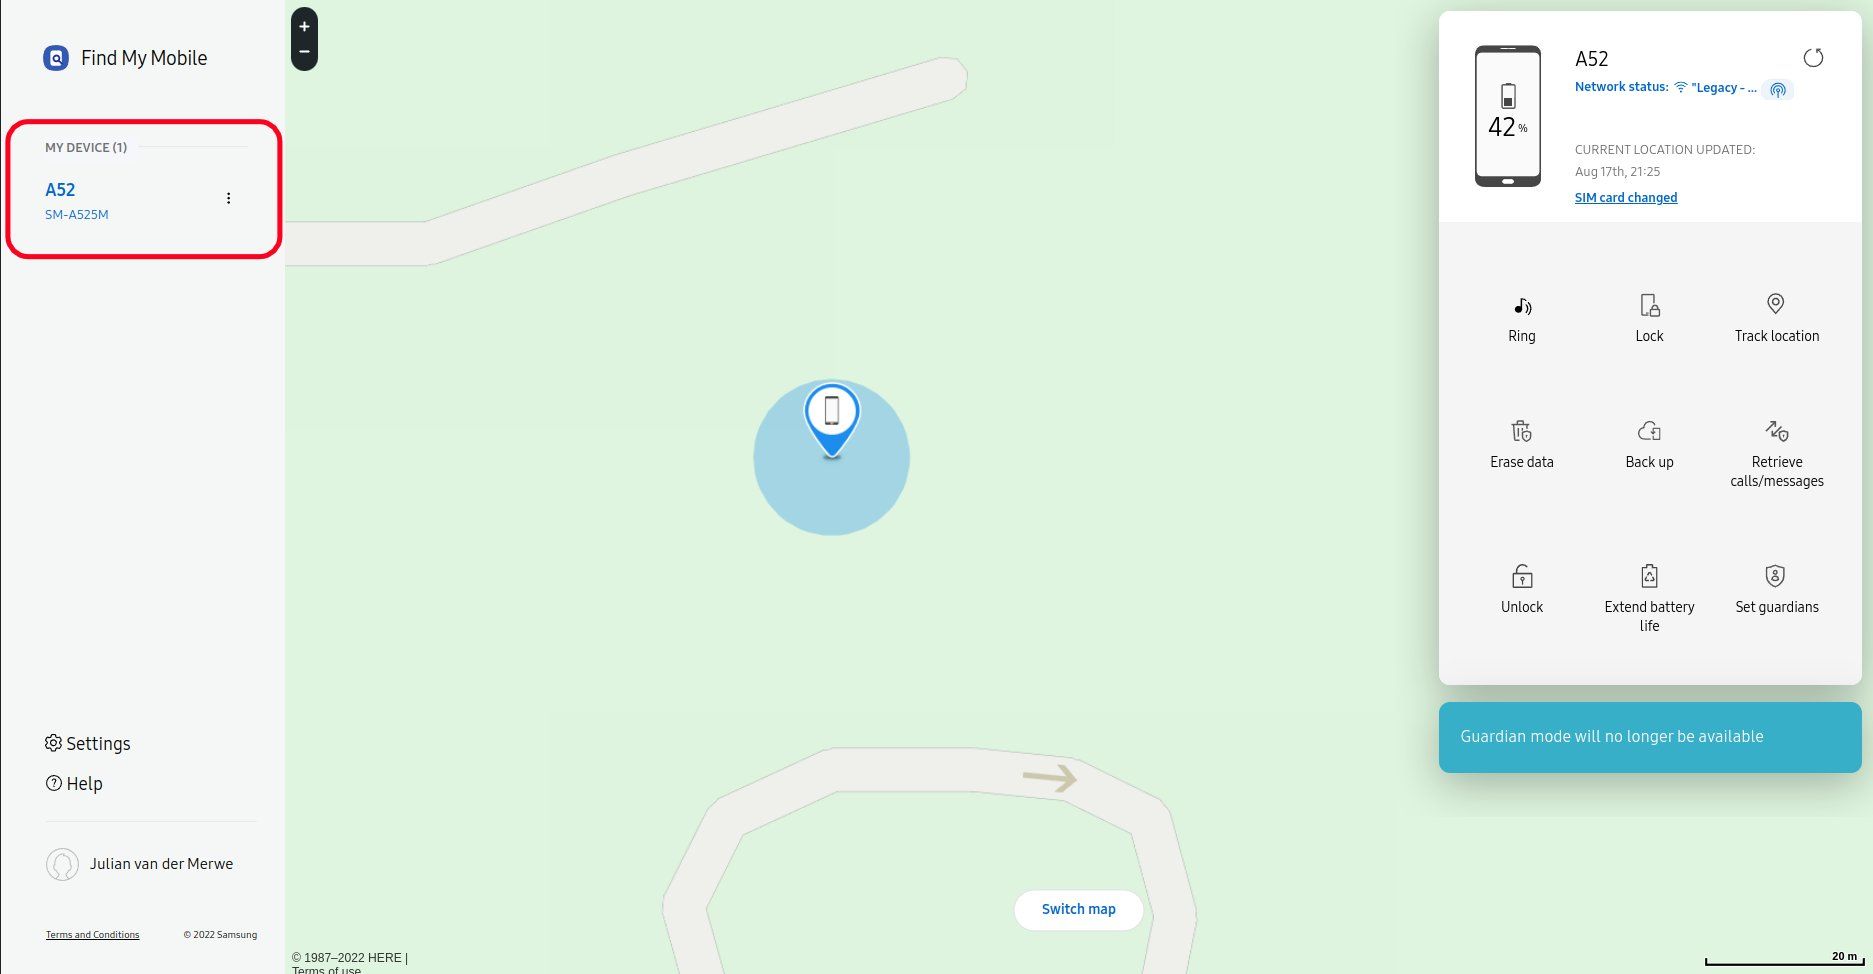 samsung find my mobile main page open with the phone location in the center and menu options to either side of the map